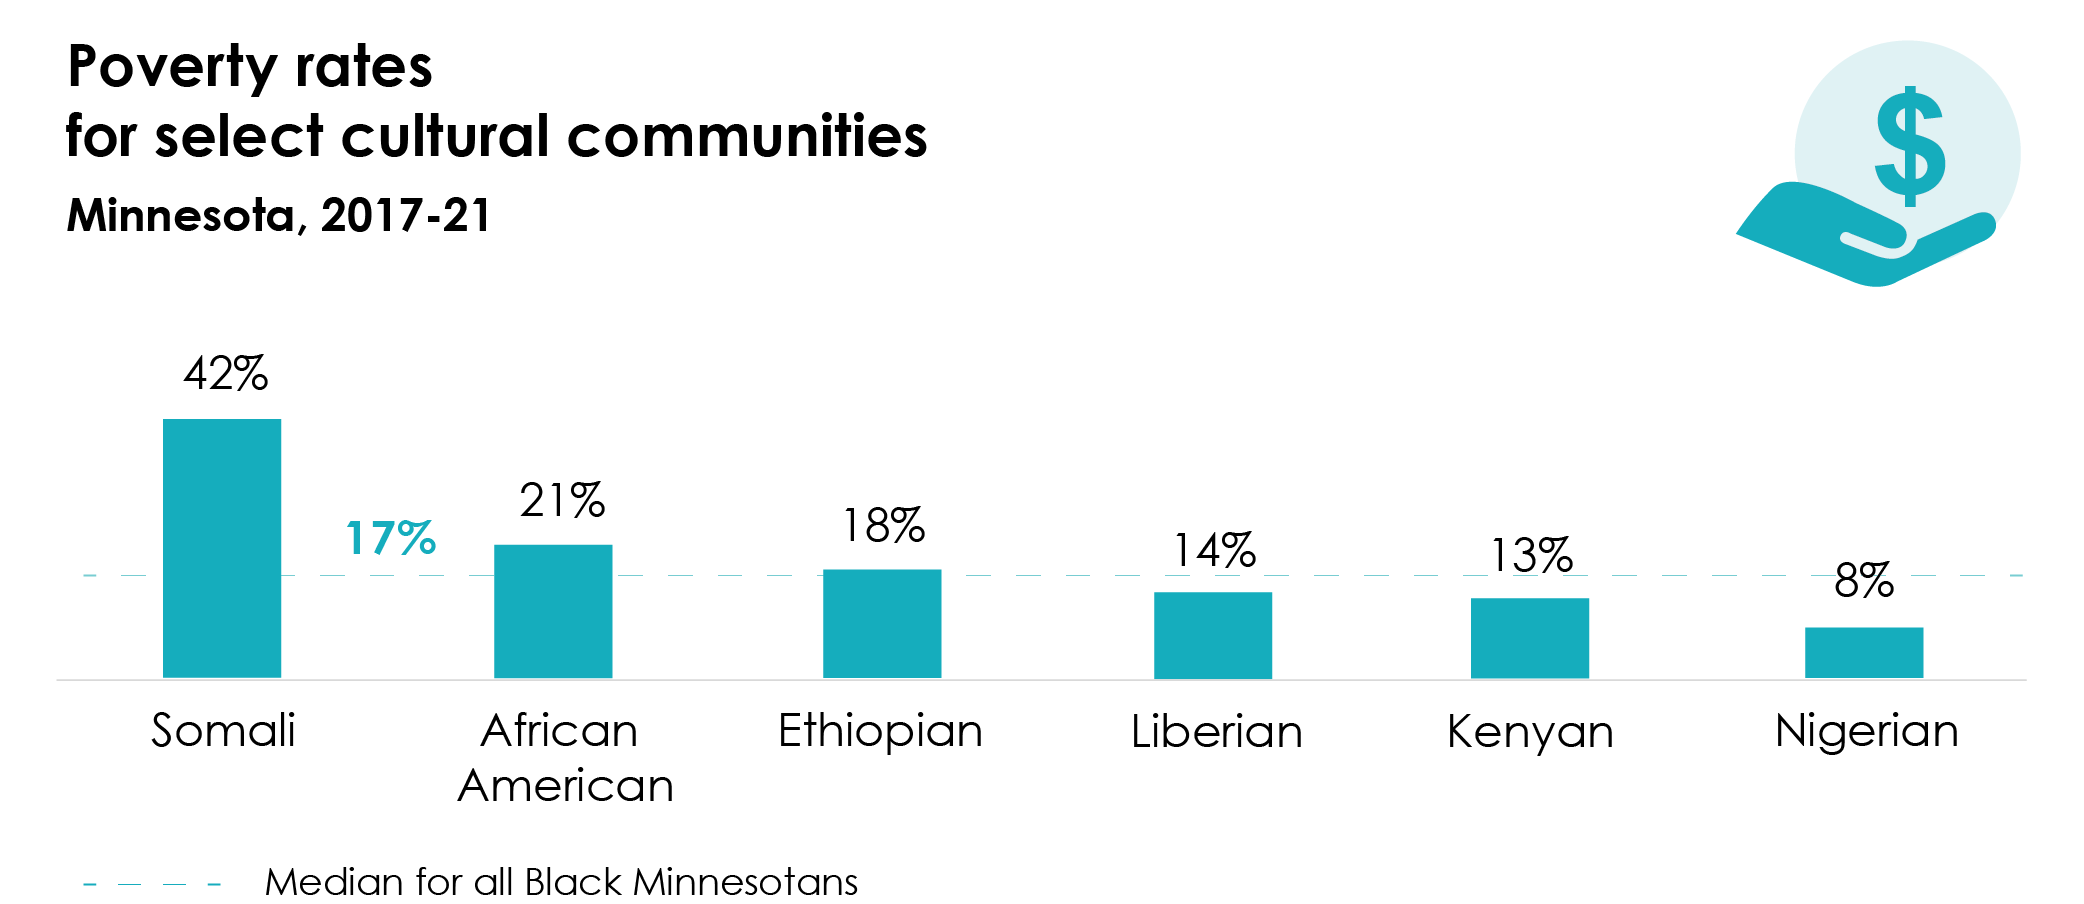 Poverty rates for select cultural communities, Minnesota 2017-21